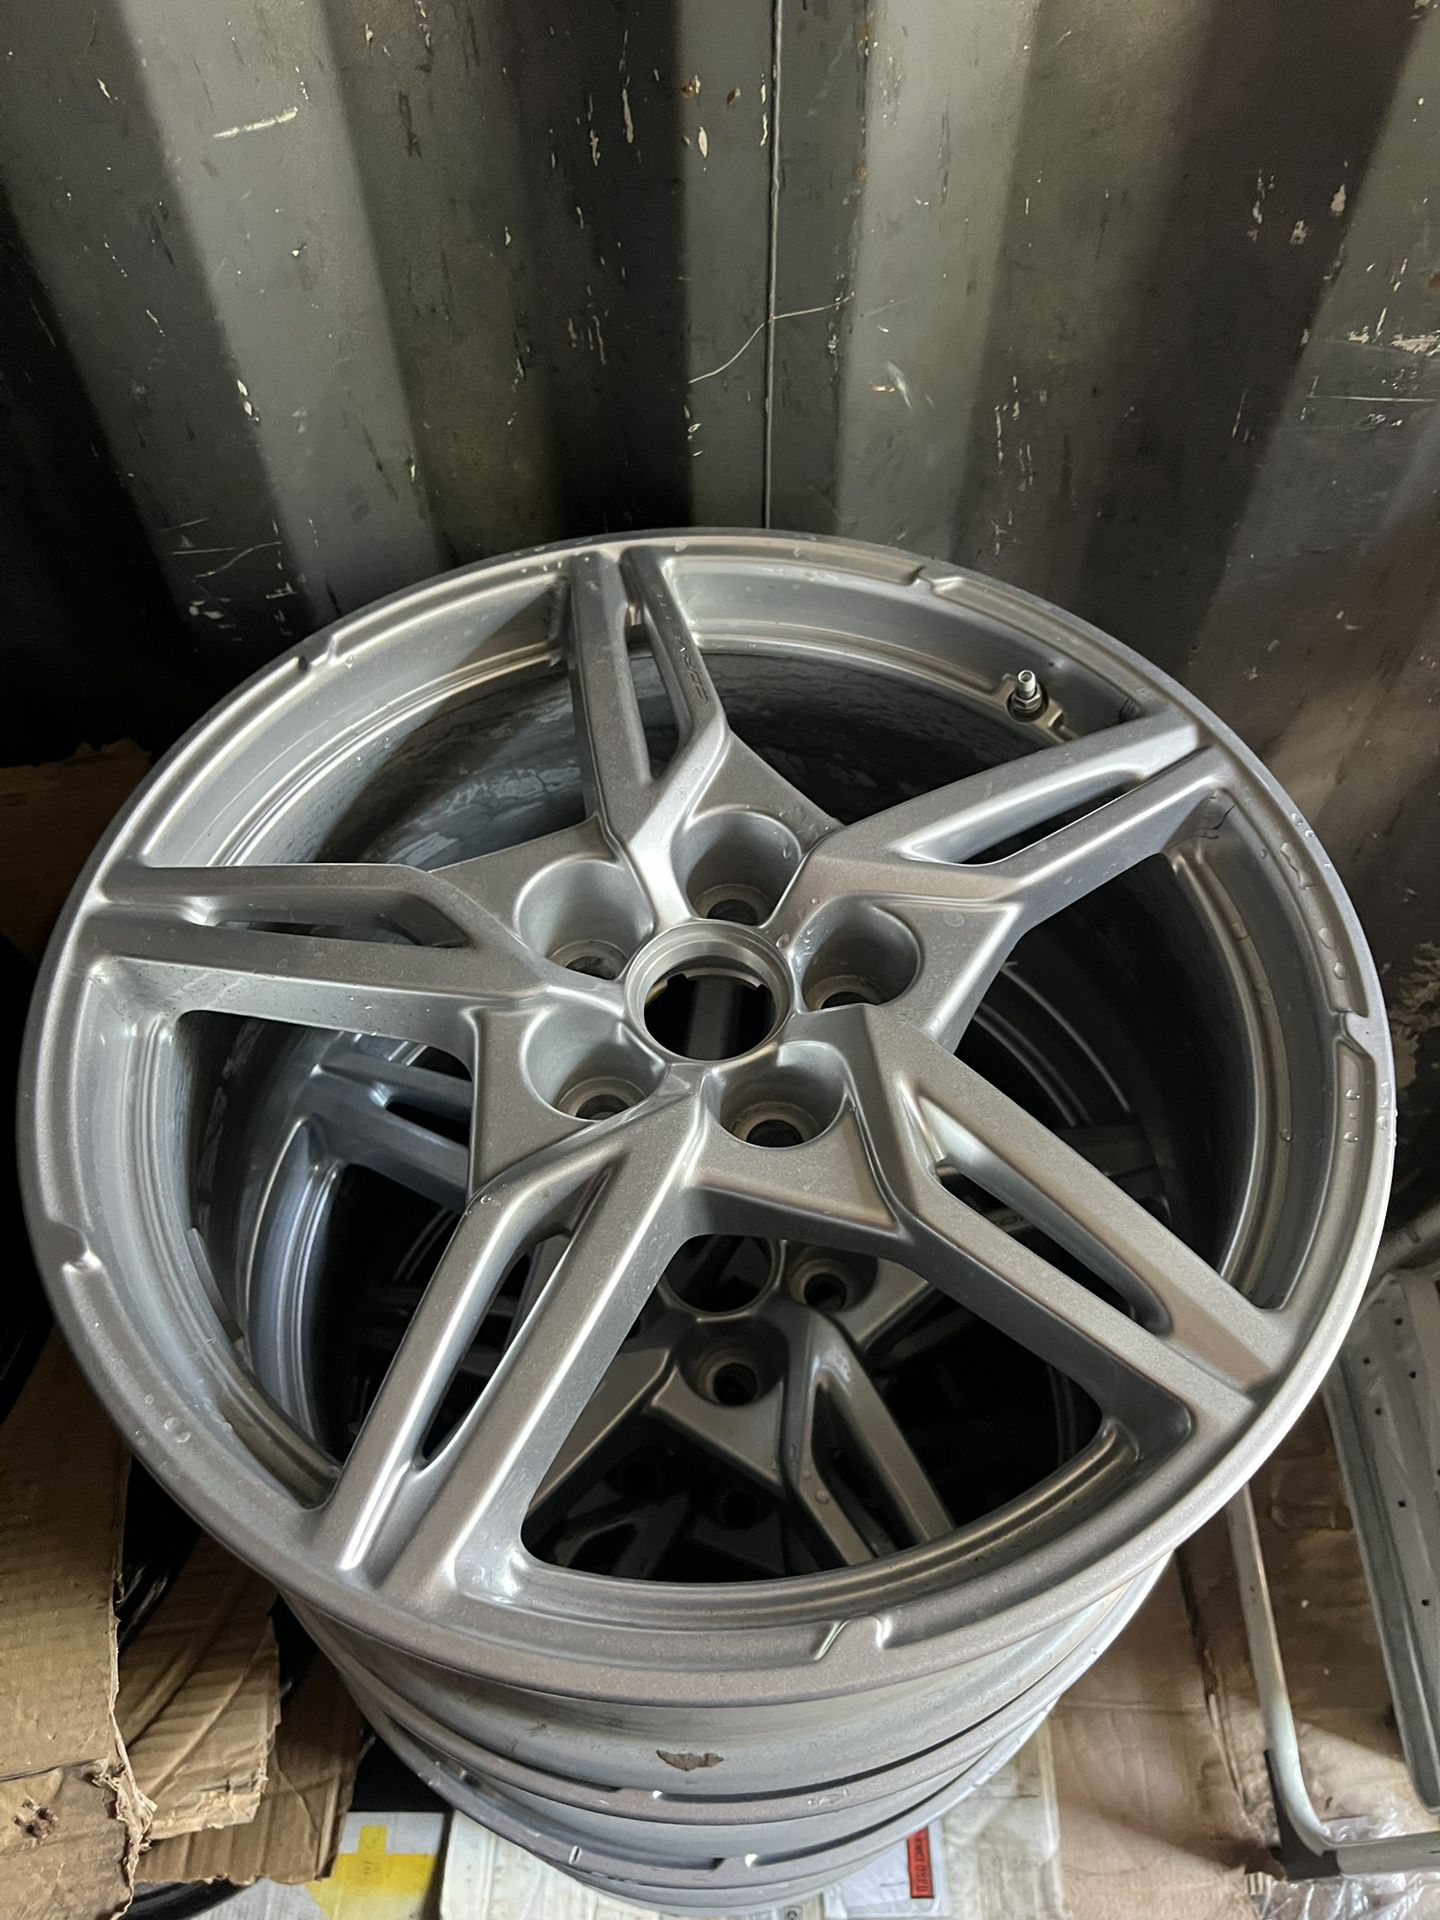 OEM Chevy corvette WHEELS 20 inch in the back and 19 front, AVAILABLE GLOSS BLACK OR OEM SILVER, custom colors available $1195 plus tax for the set of